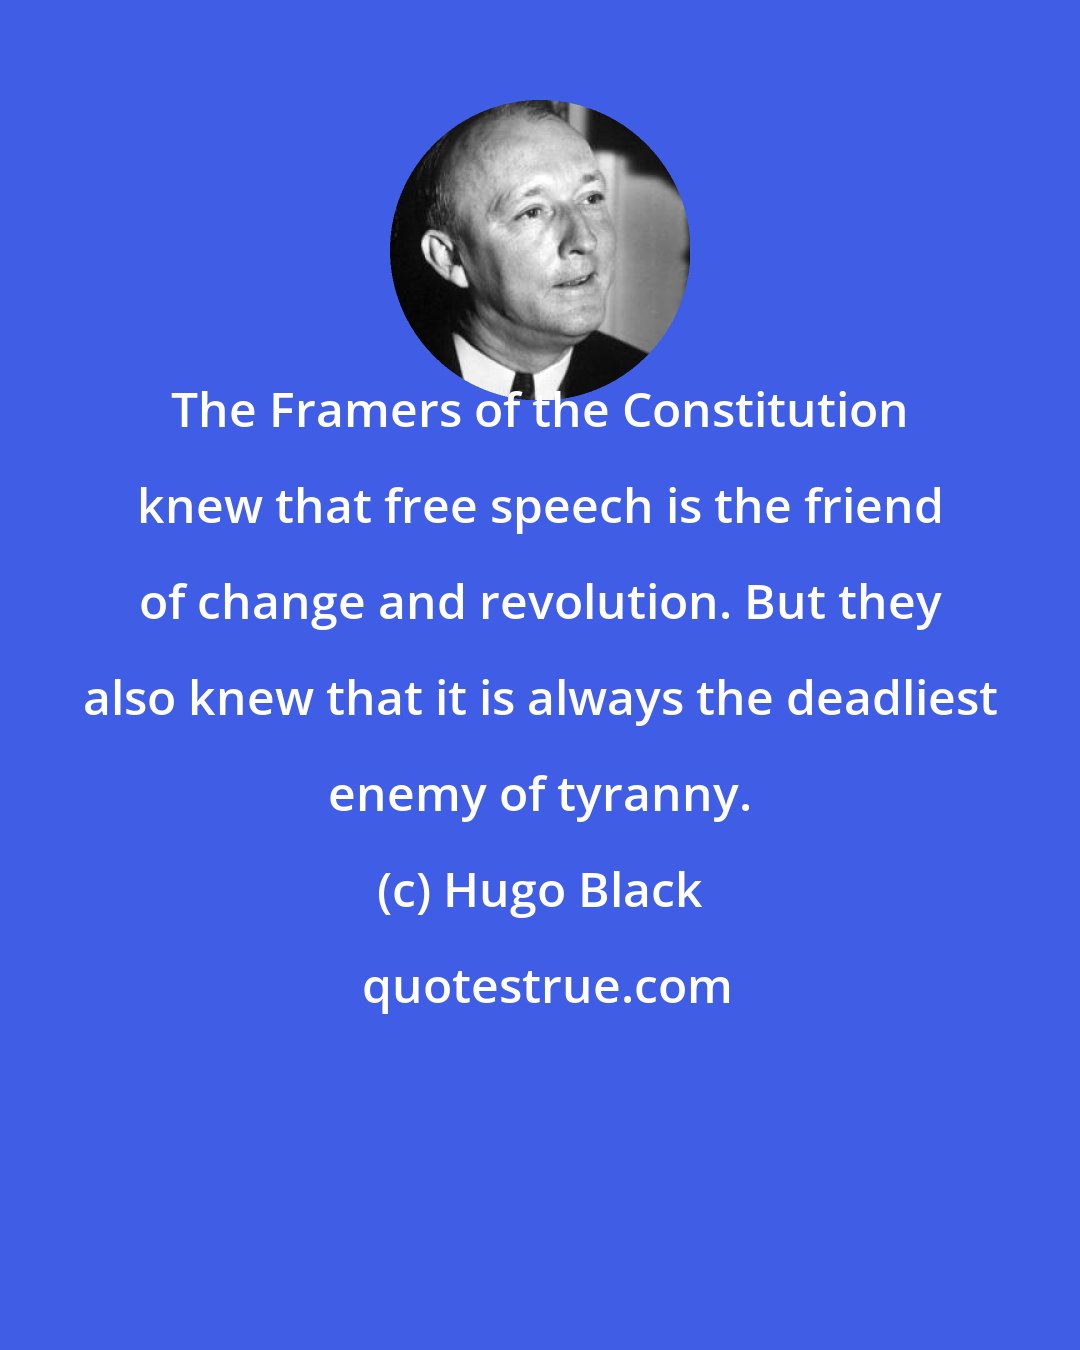 Hugo Black: The Framers of the Constitution knew that free speech is the friend of change and revolution. But they also knew that it is always the deadliest enemy of tyranny.